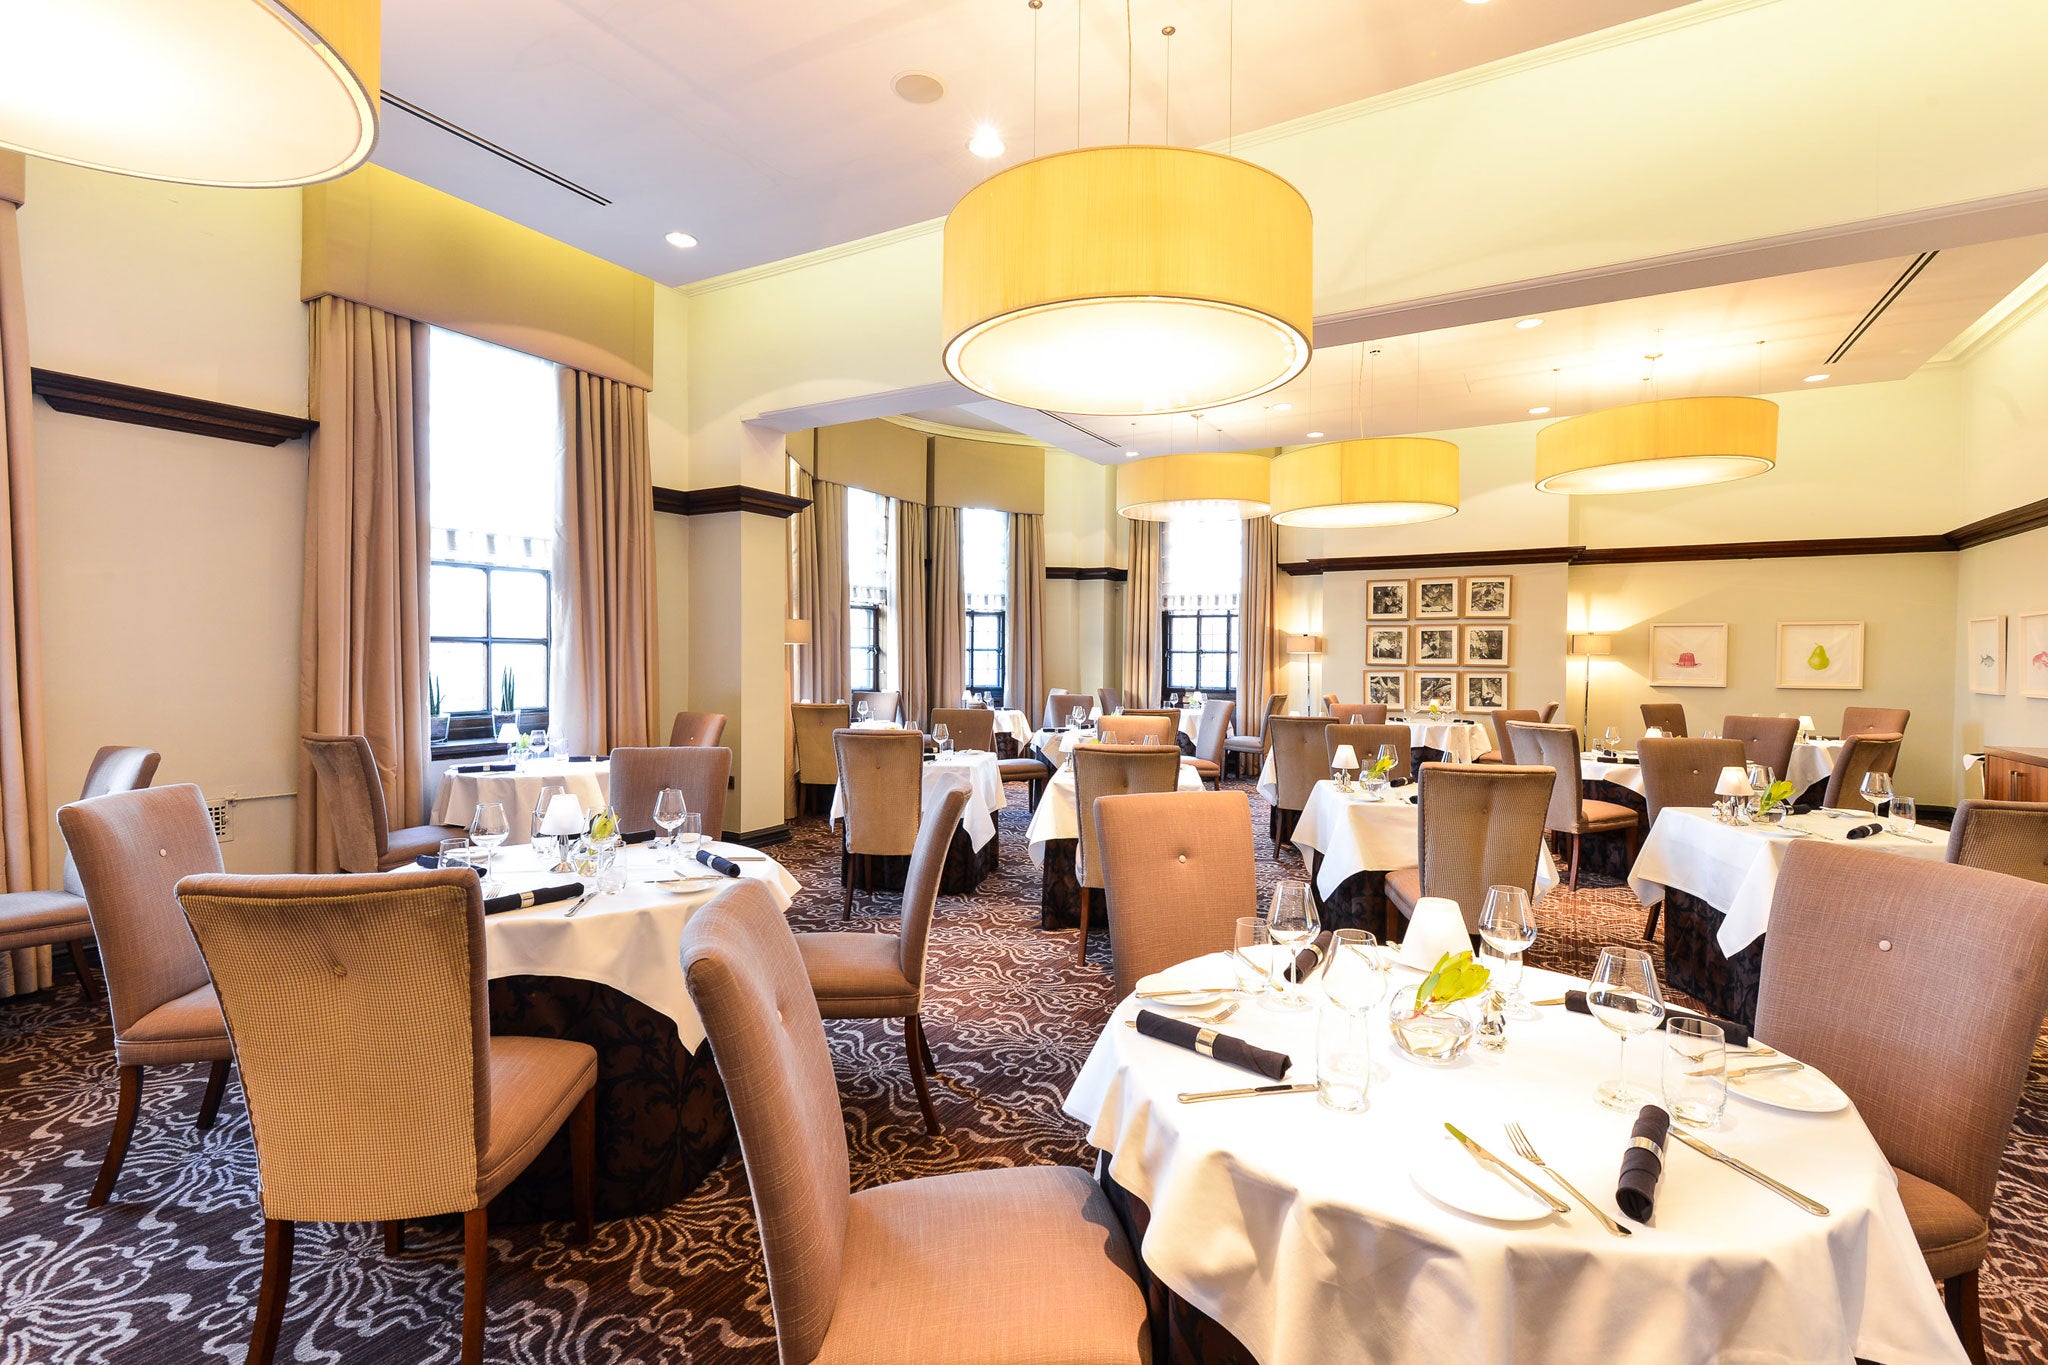 Baroque revival: The Grill Room at the Grand is housed in the former headquarters of the North East Railway in York